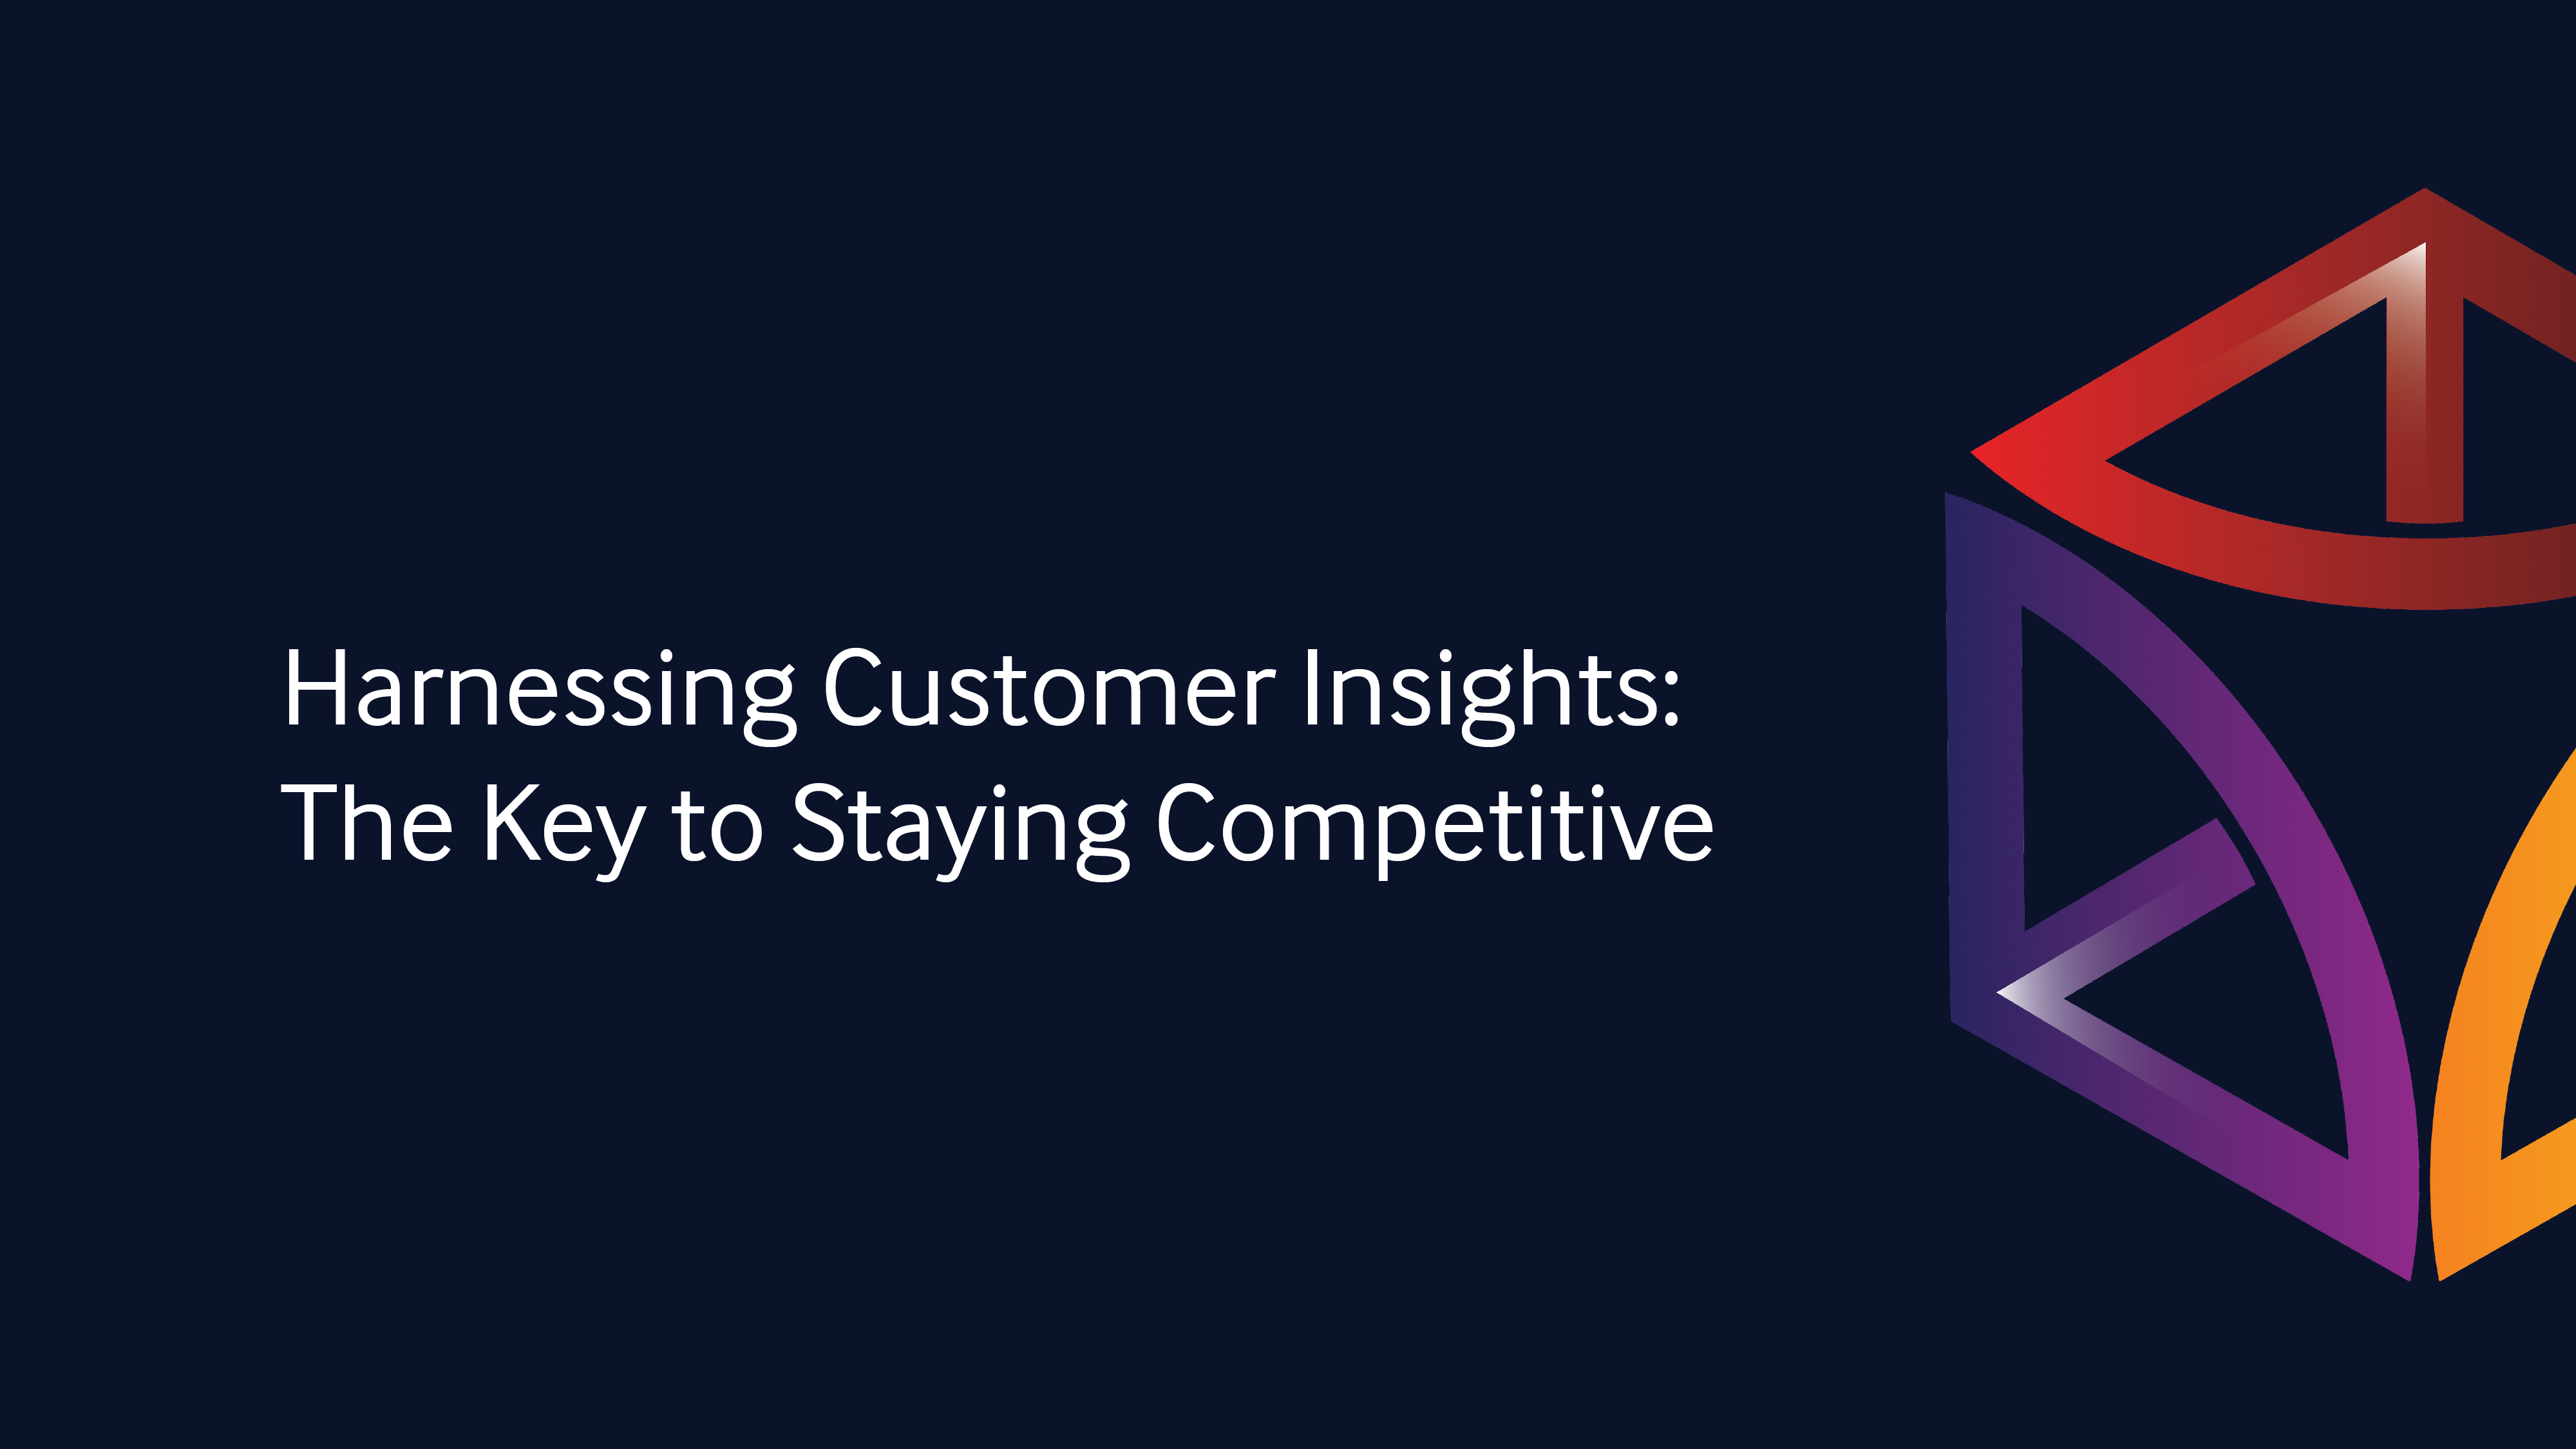 Harnessing Customer Insights: The Key to Staying Competitive